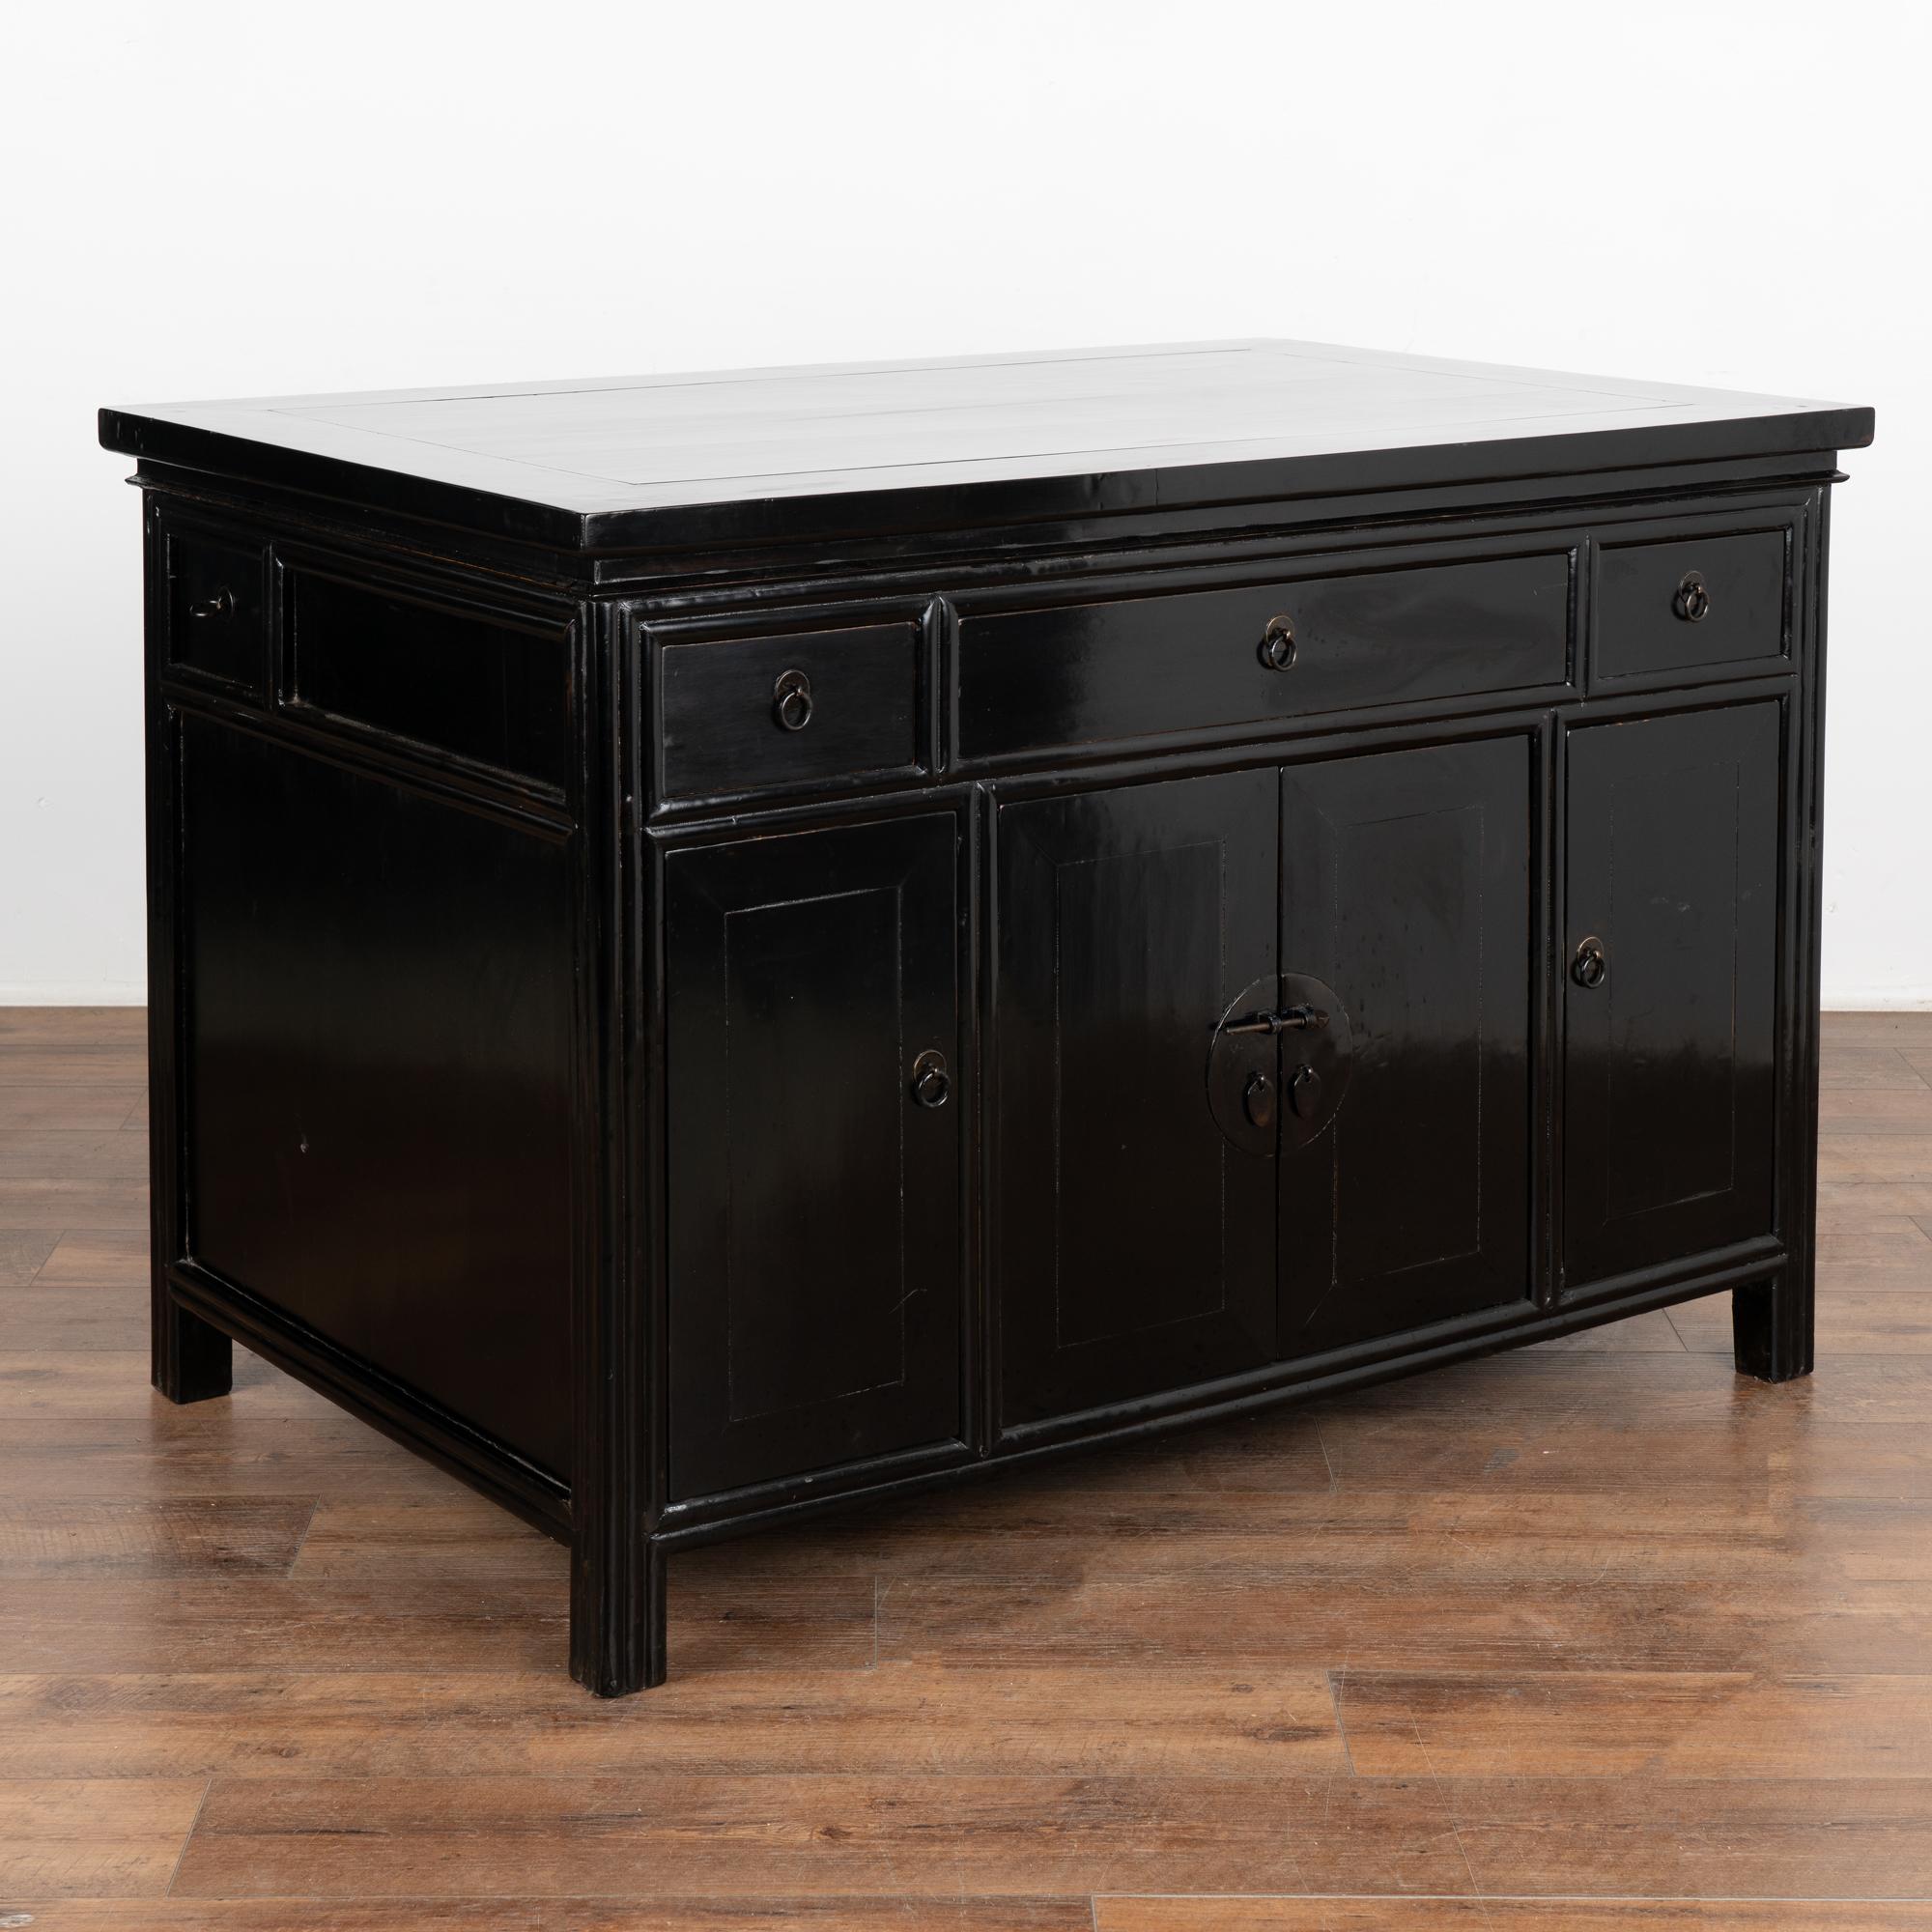 The black lacquered polished finish on this antique Chinese cabinet provides a modern look allowing this to serve well in a contemporary setting. This free standing cabinet will be a stylish statement piece for a central entryway or even serve as a